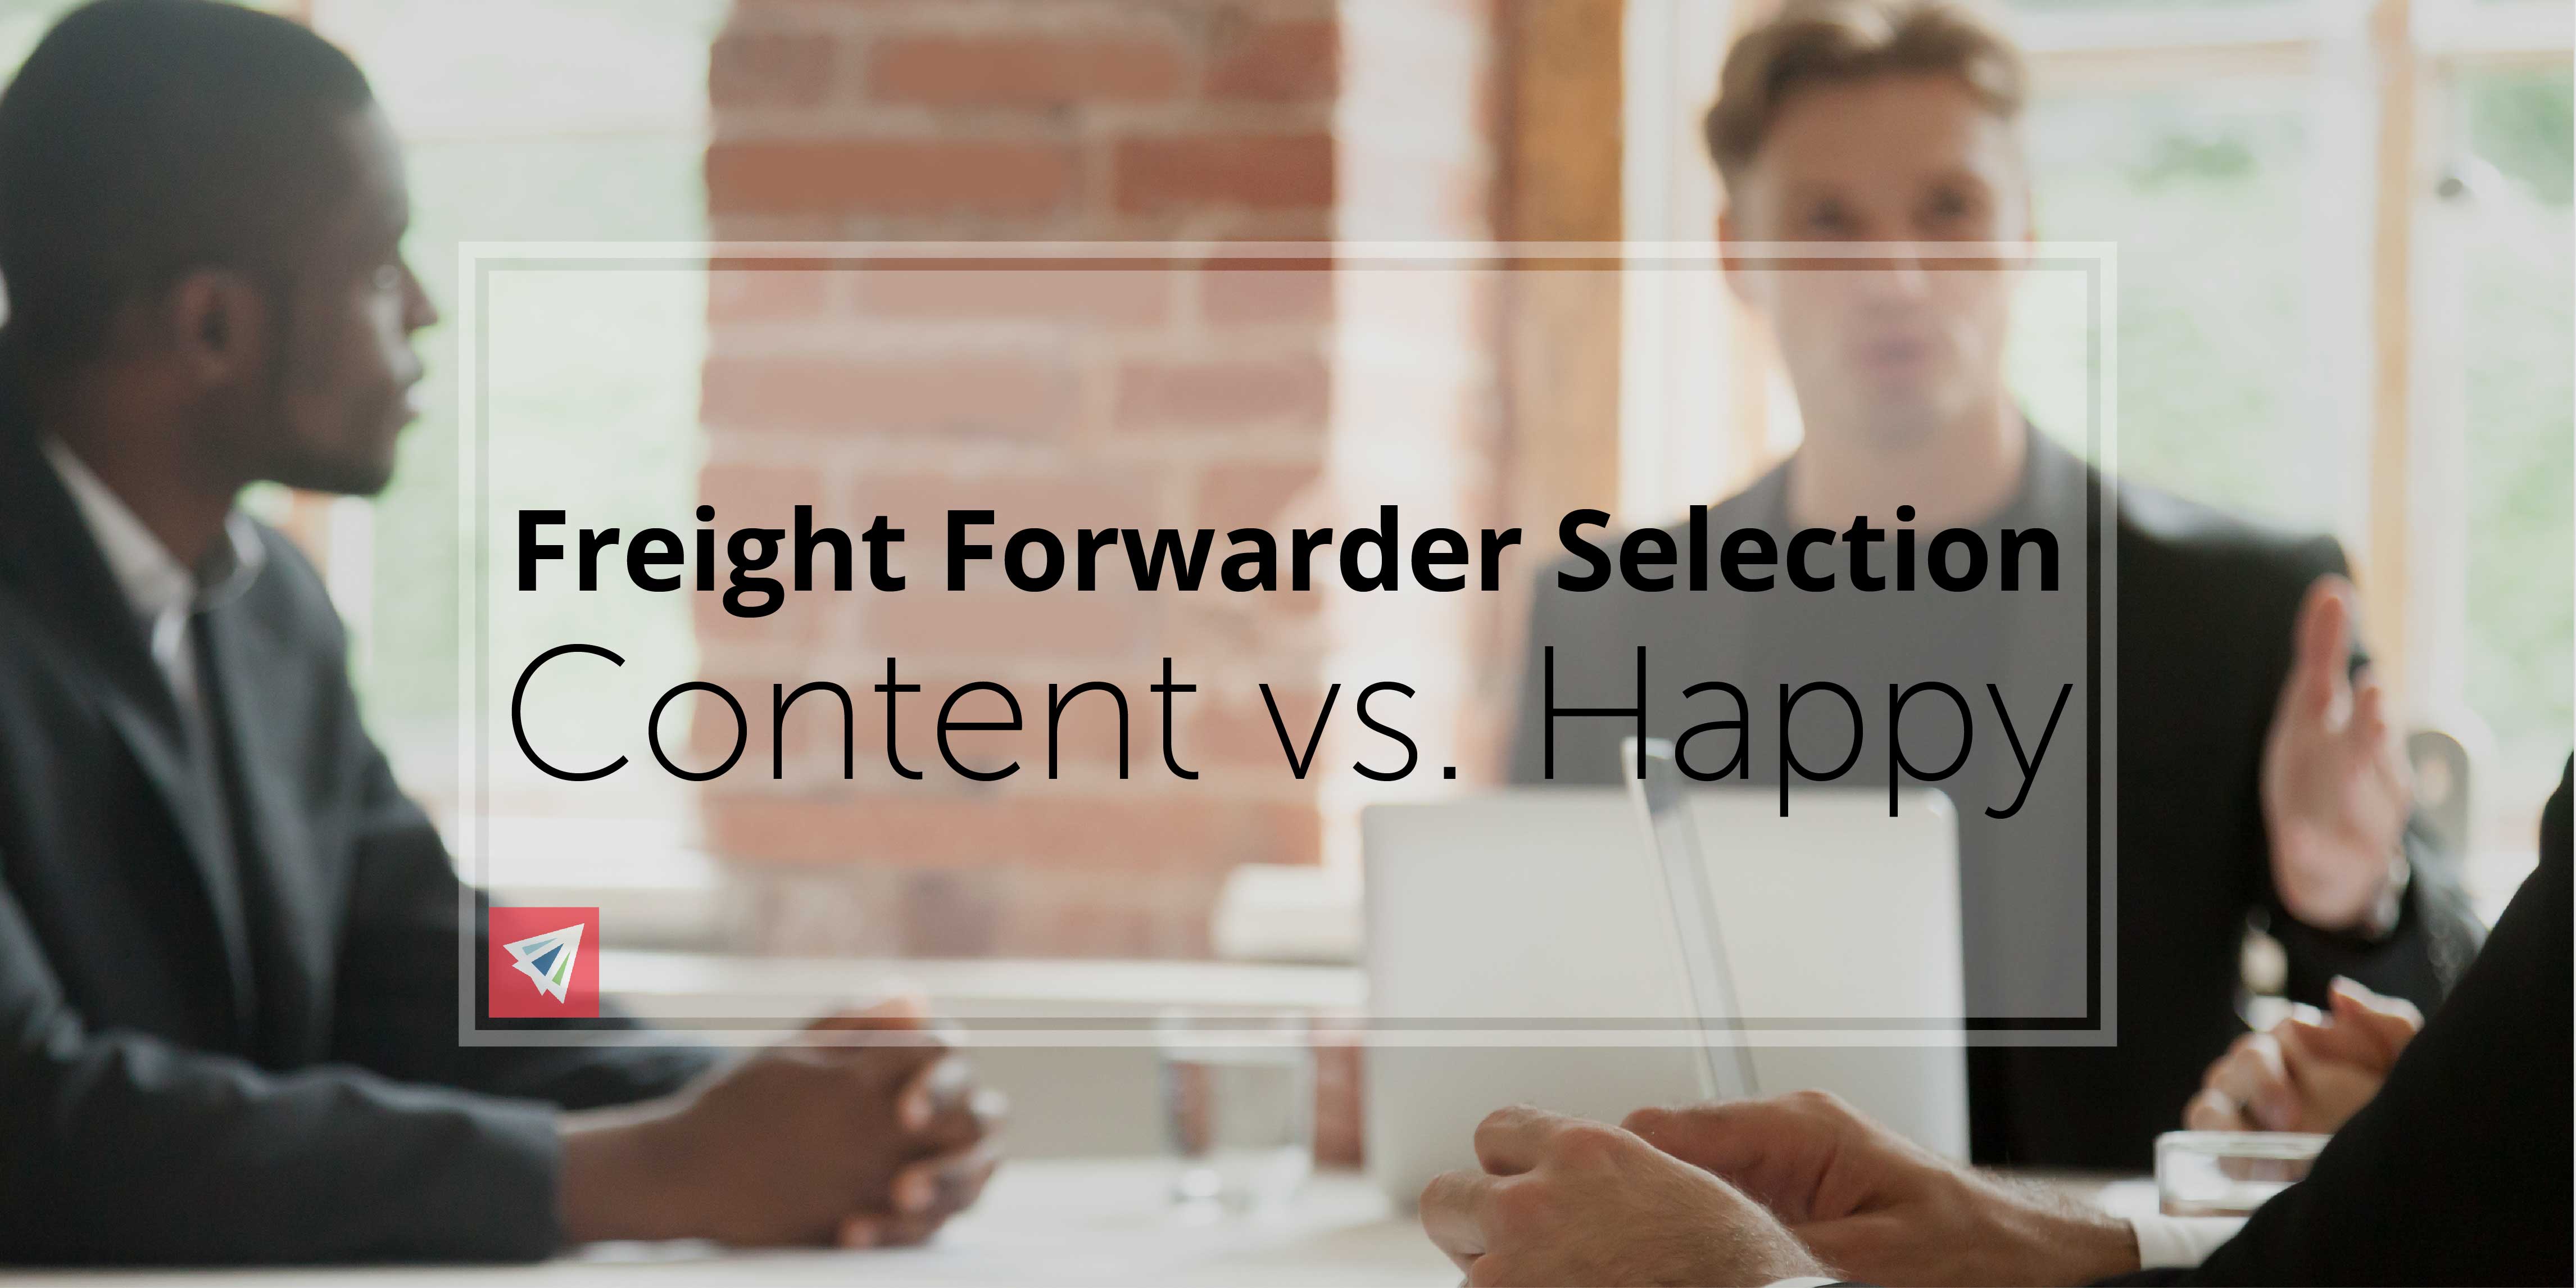 Freight Forwarder Selection: Content vs. Happy